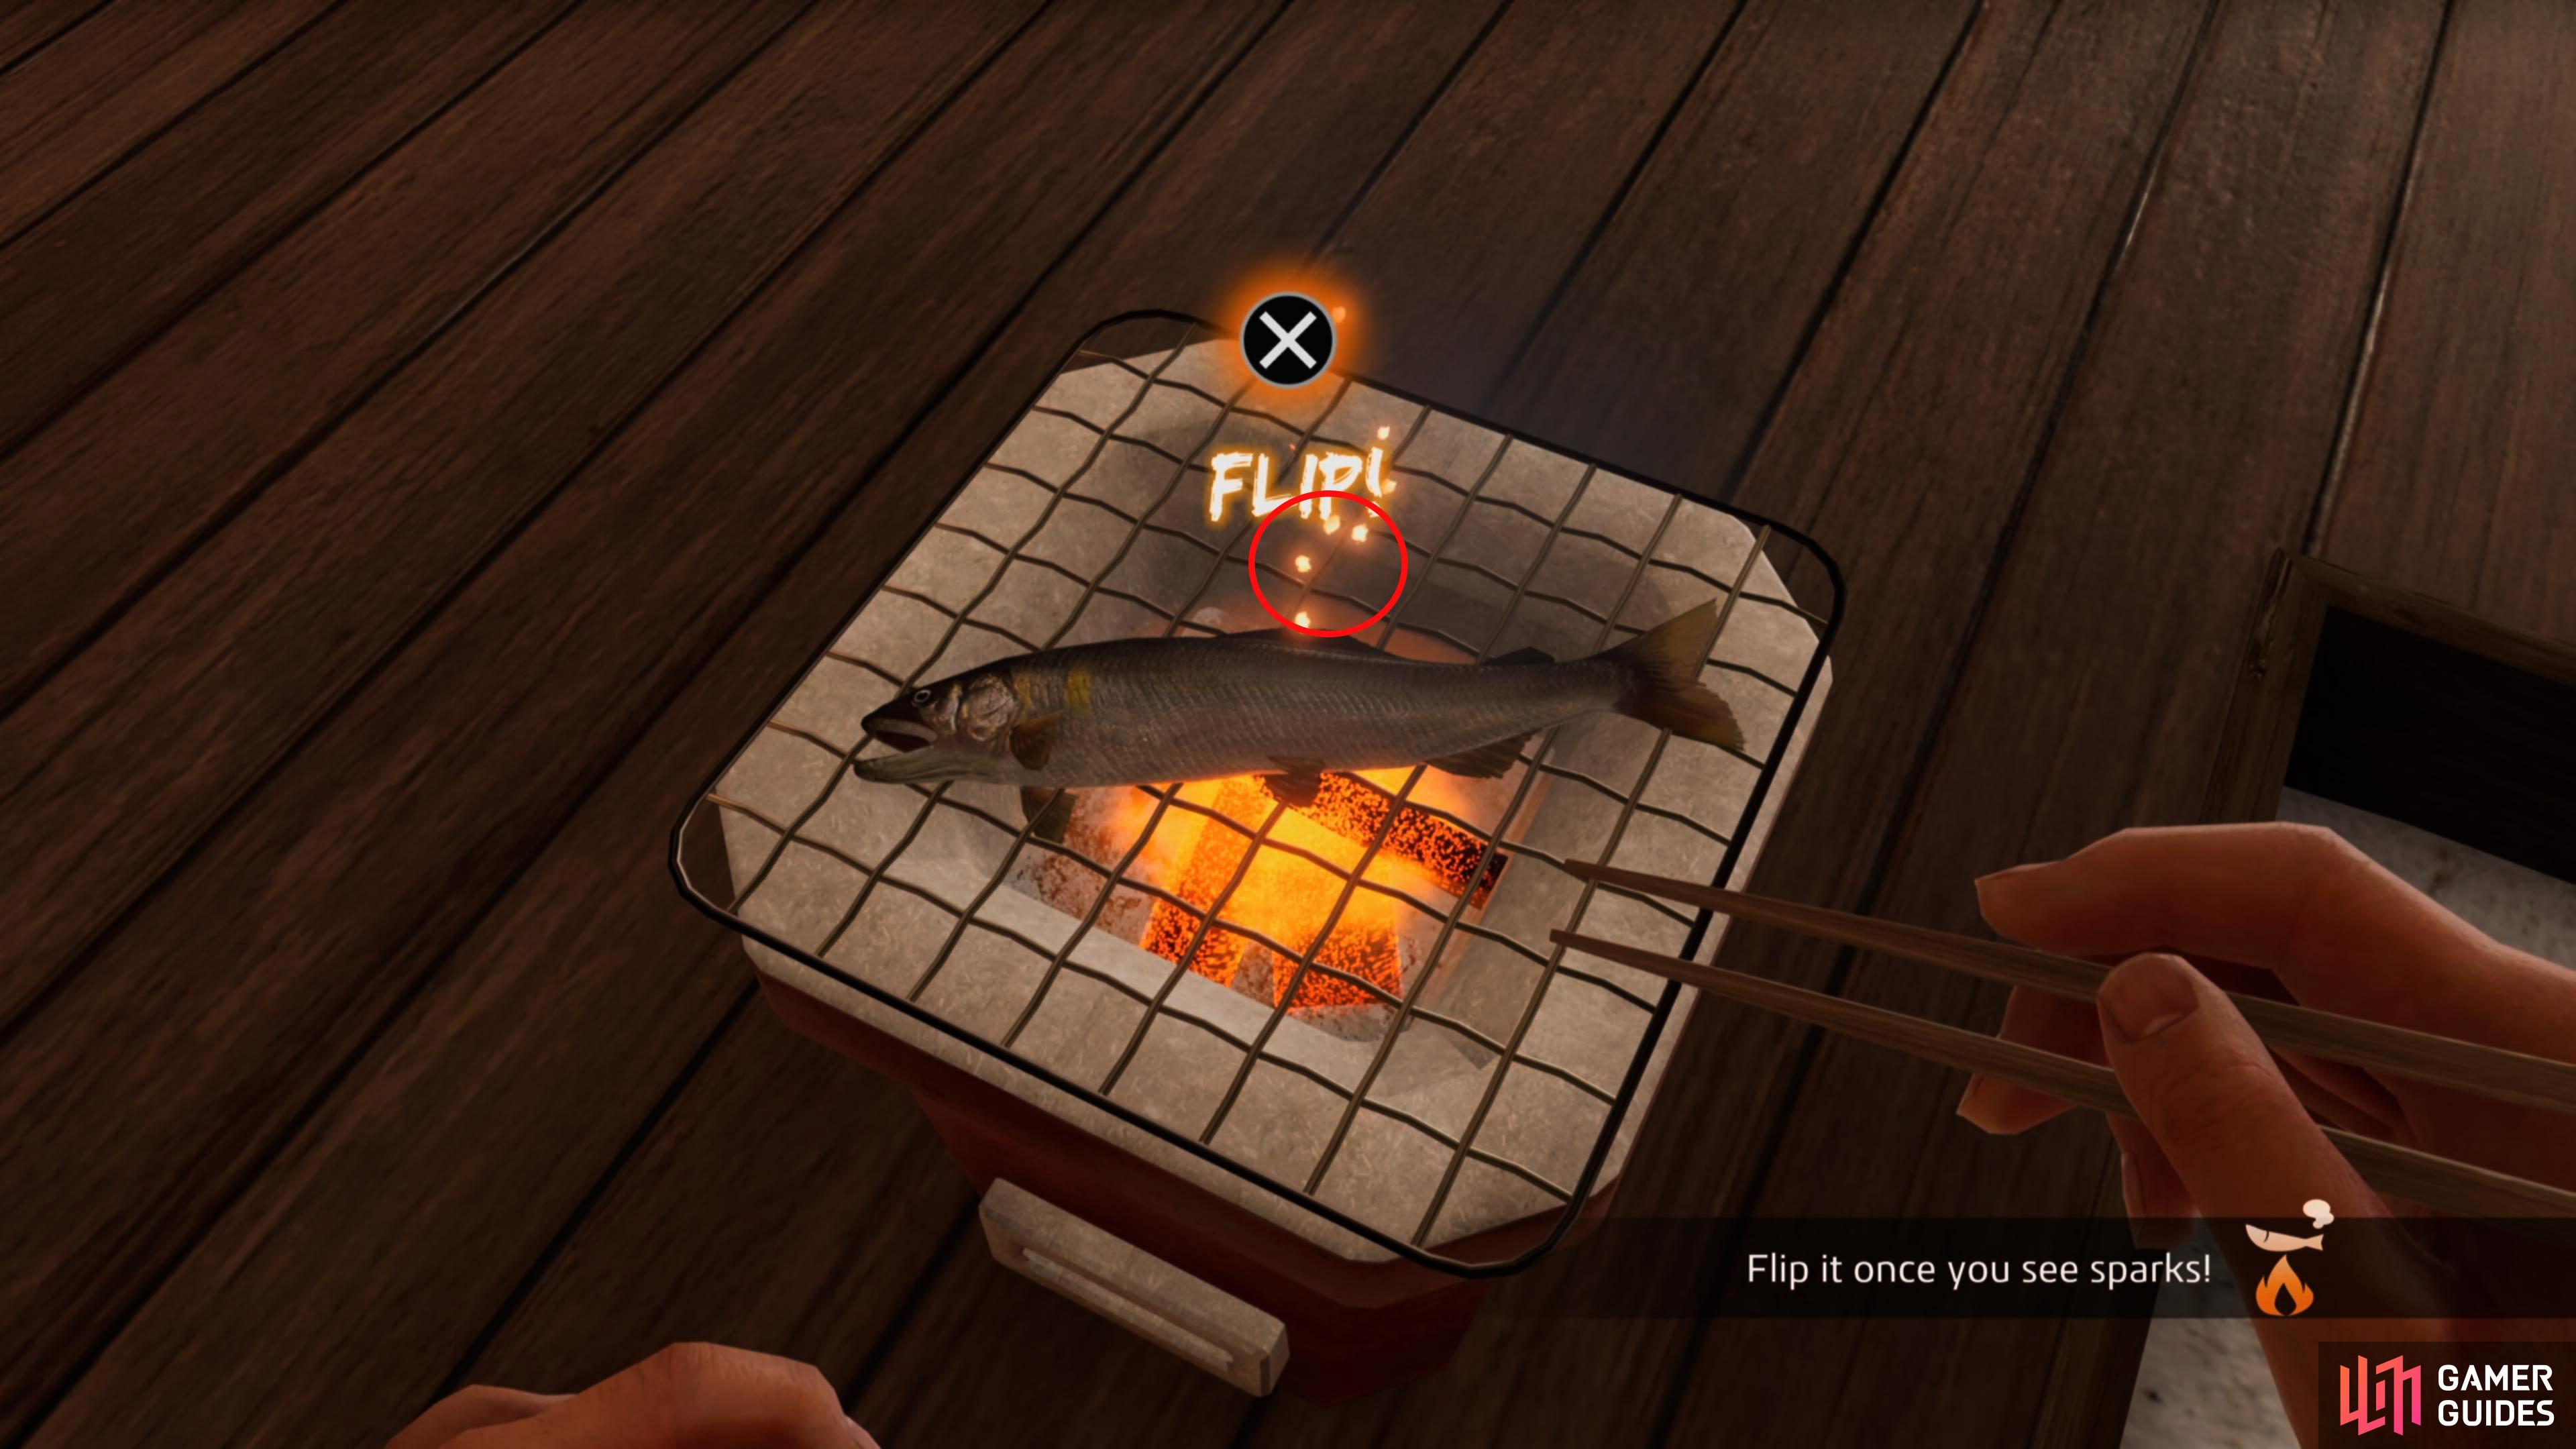 When grilling, flip the fish when you see the larger embers appear above it.